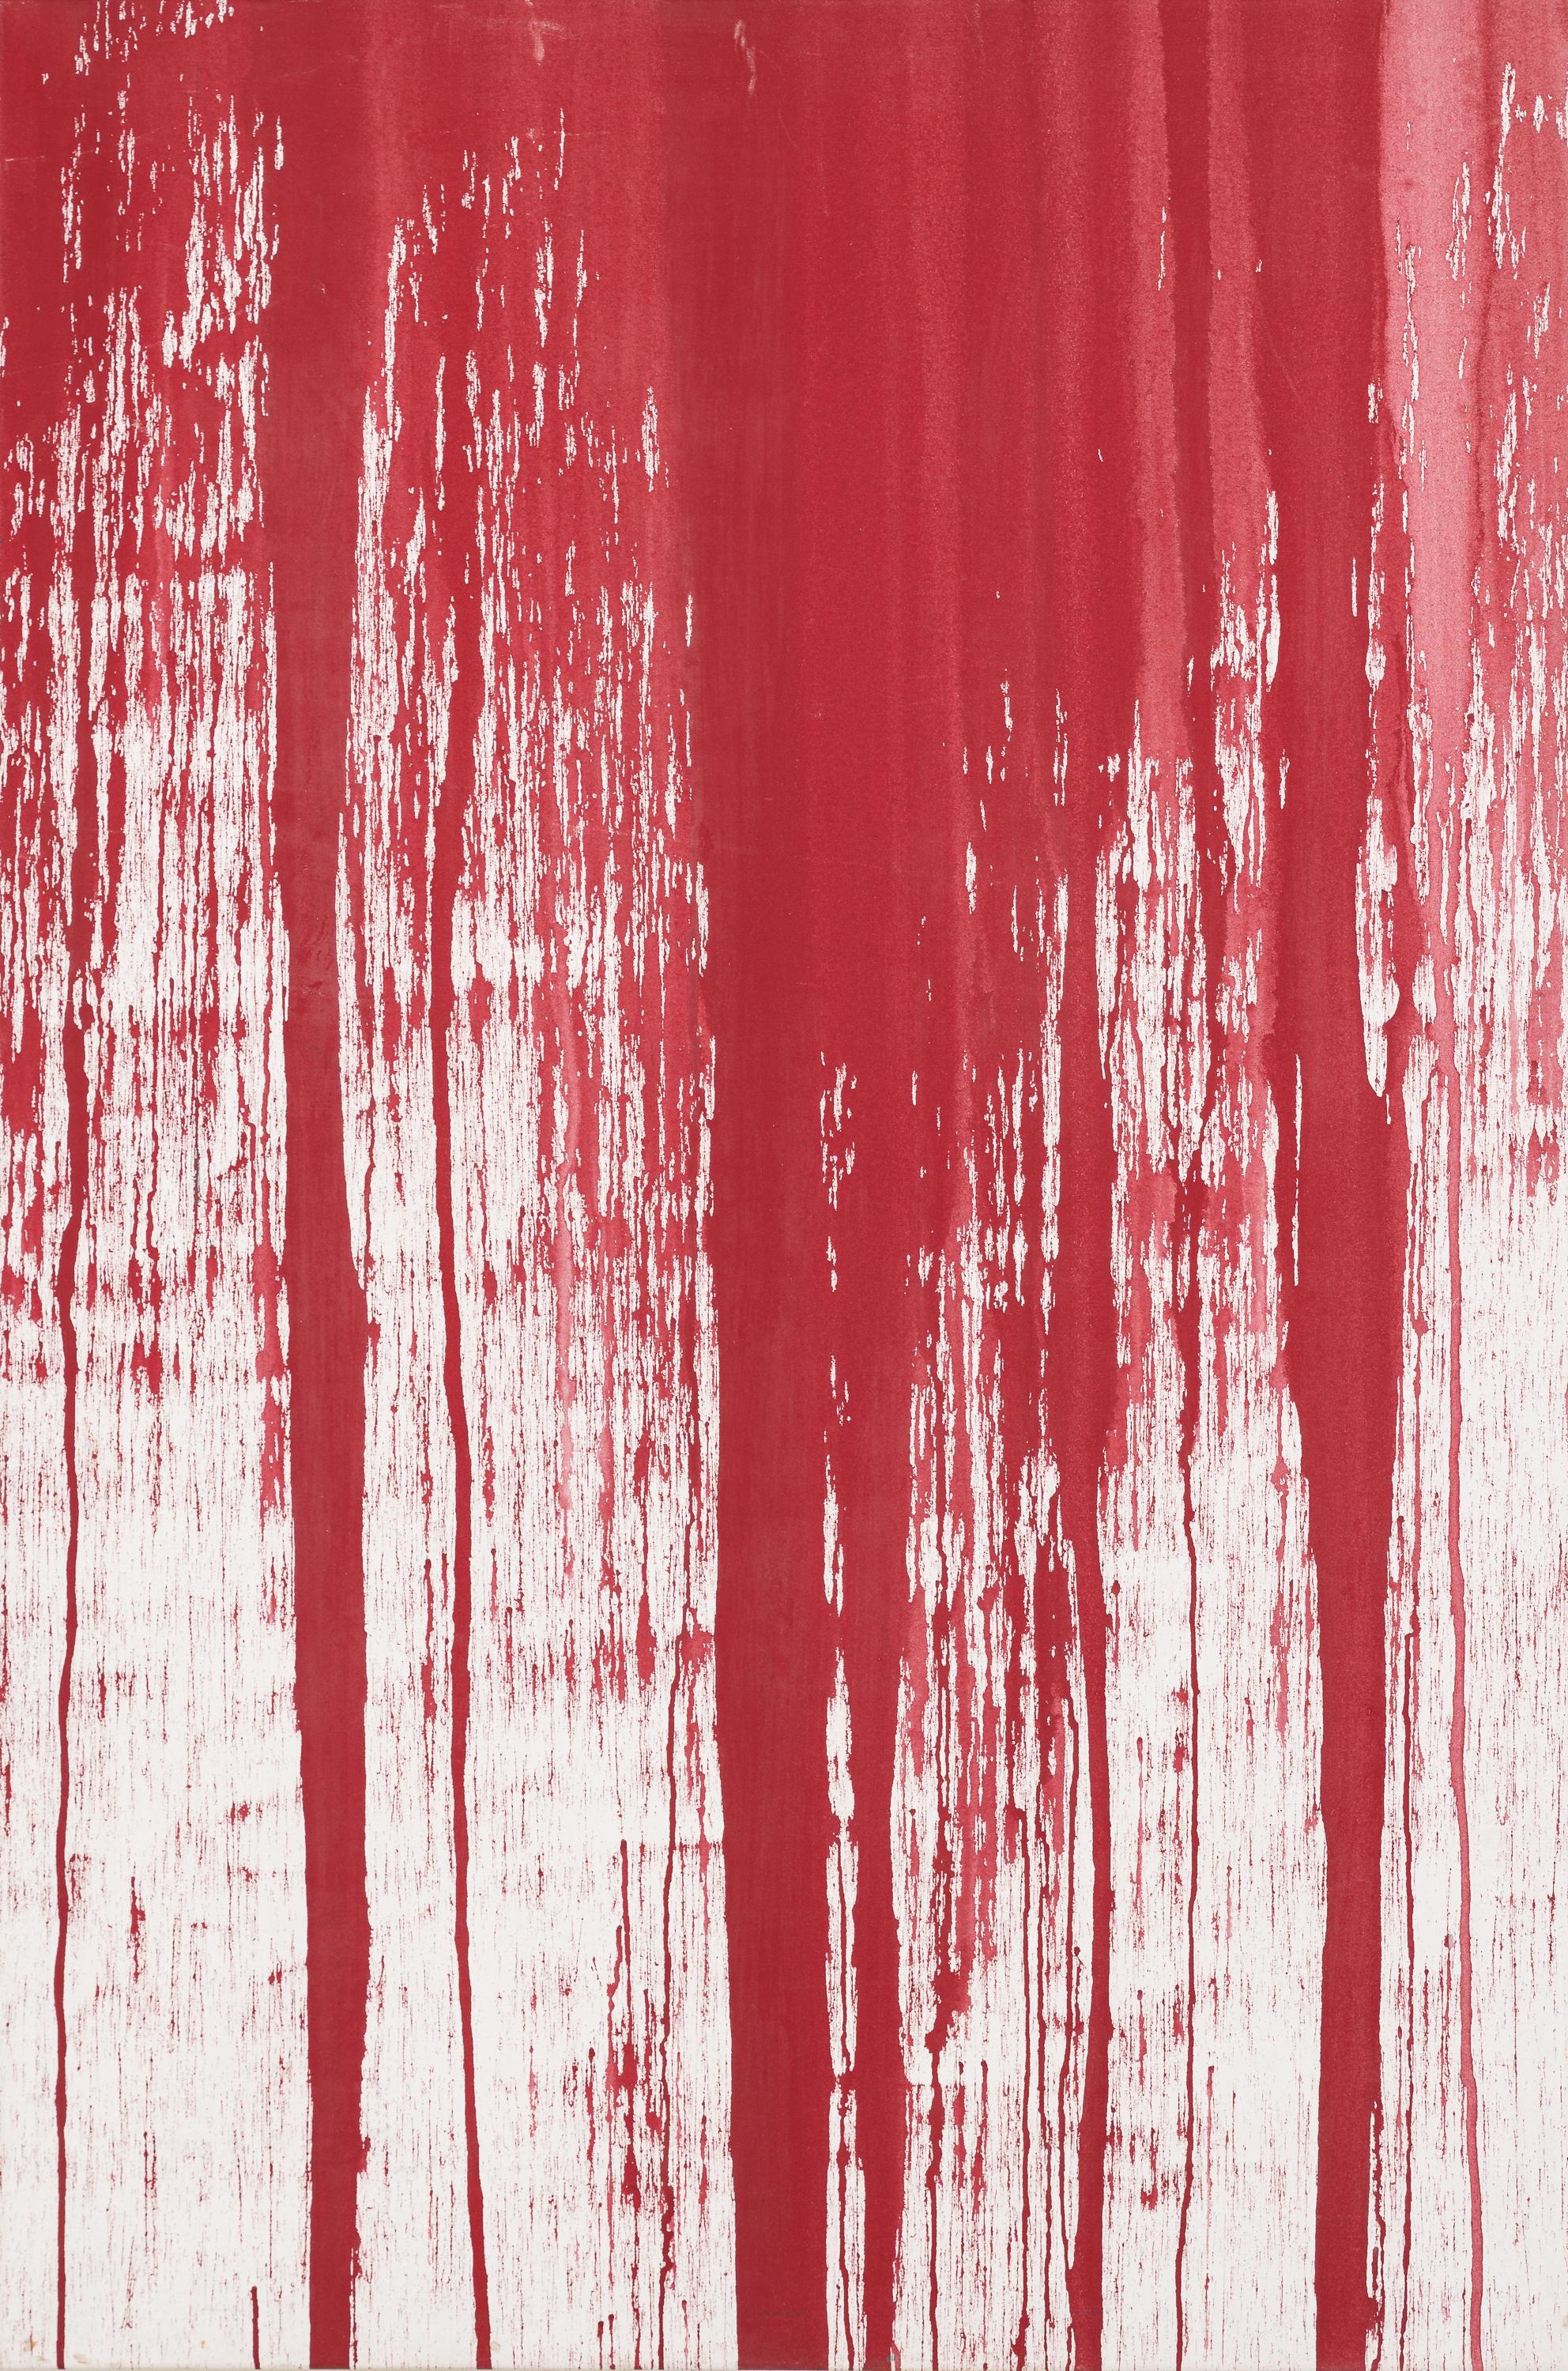 Hermann Nitsch Abstract Painting - Ohne Titel, 2003